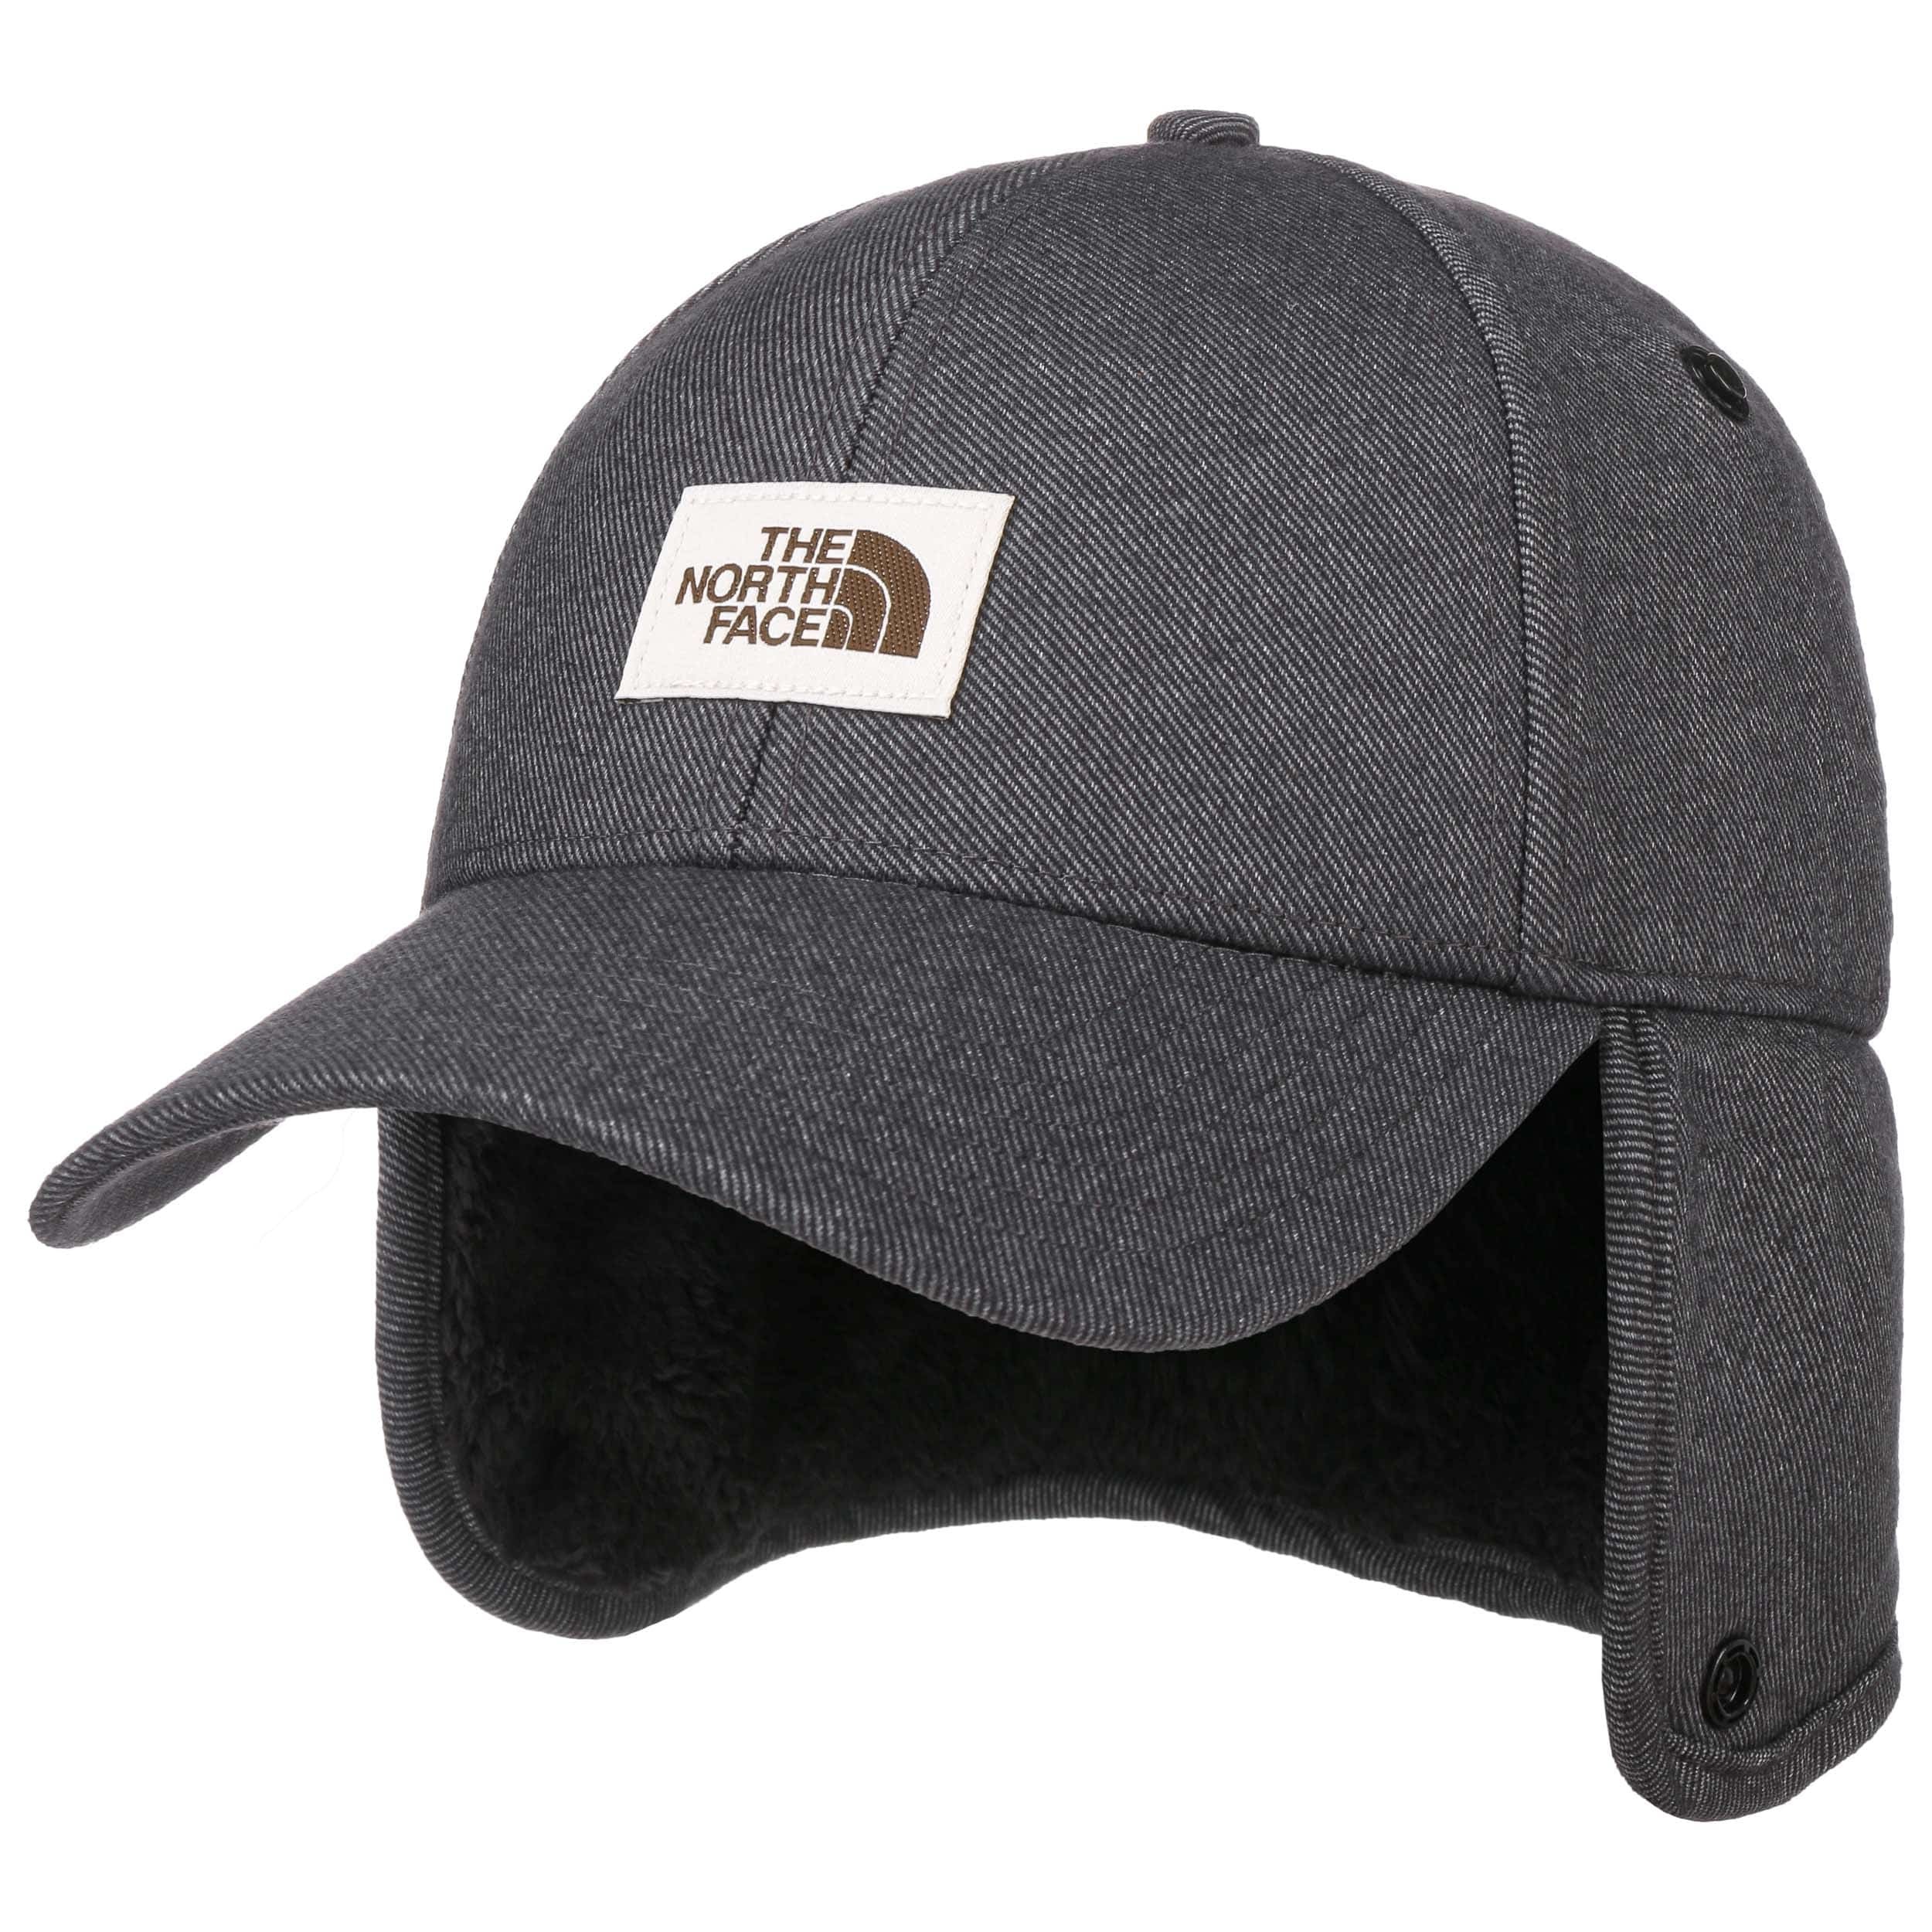 north face hat with ear flaps